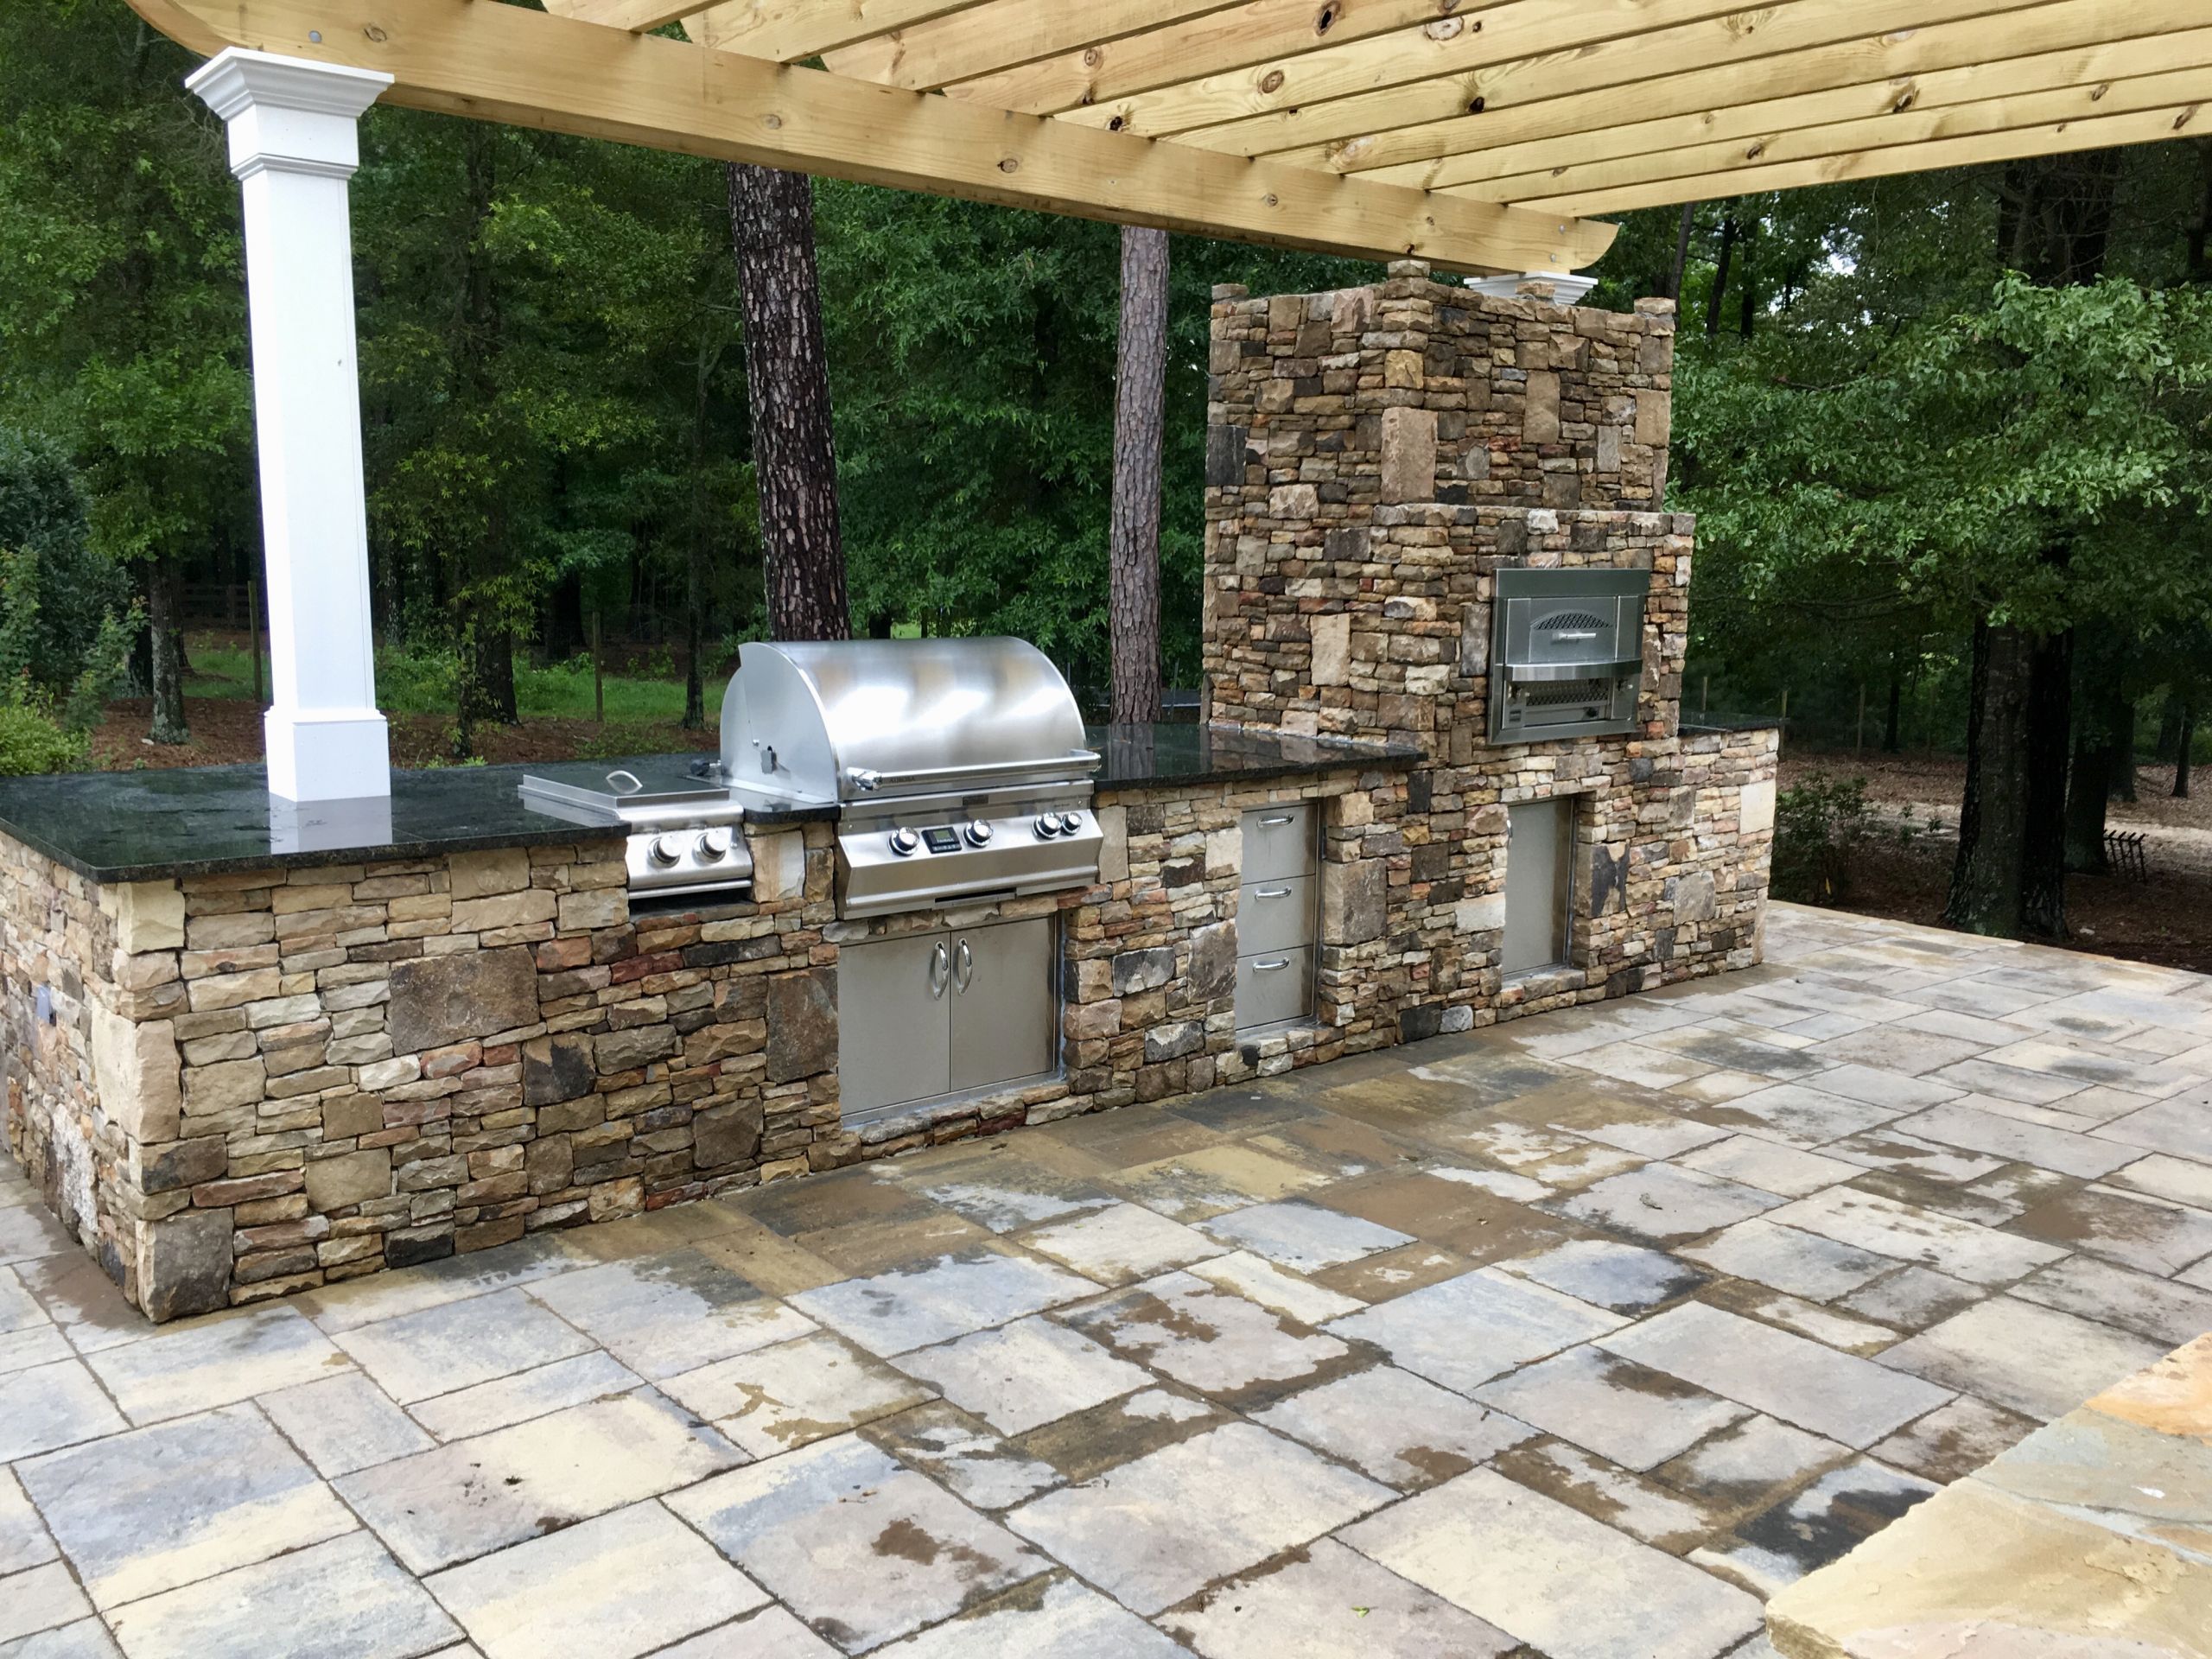 Outdoor Kitchen With Pizza Oven
 Outdoor Kitchen Built in Gas Pizza Oven Fireside